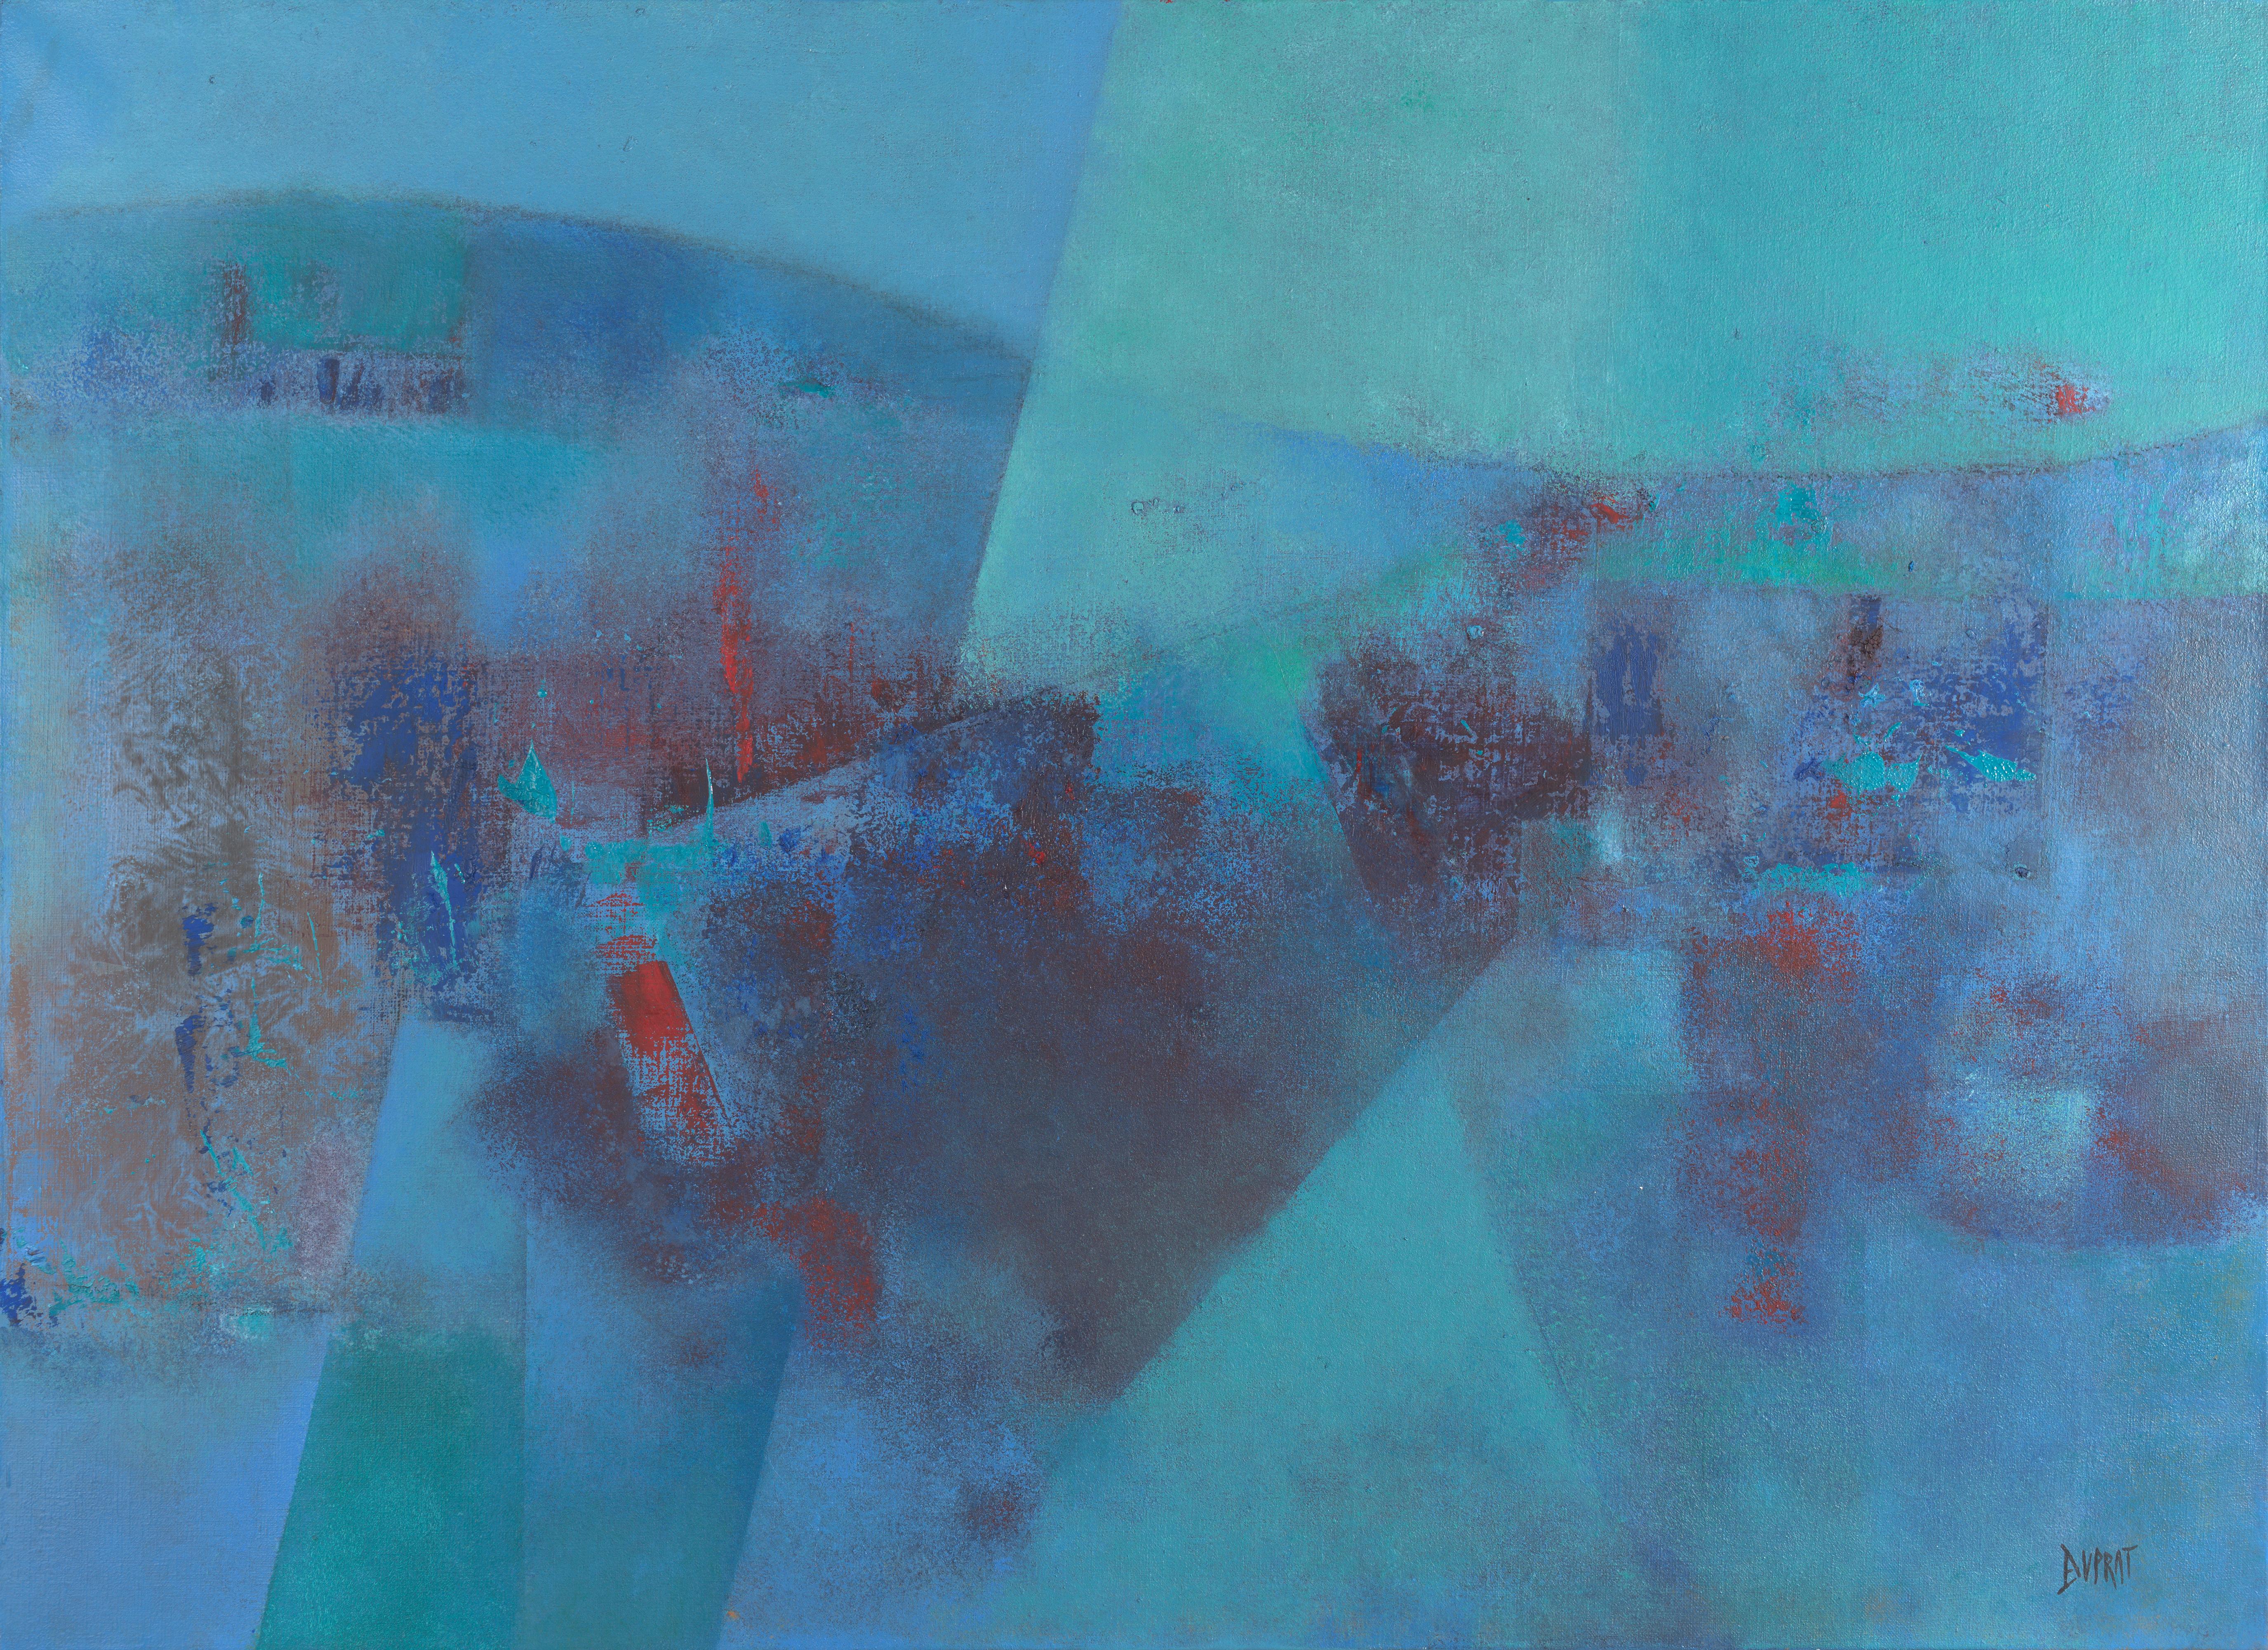 Françoise Duprat Landscape Painting - "Here & There", Abstract Marine Landscape Turquoise & Red Touch Oil Painting